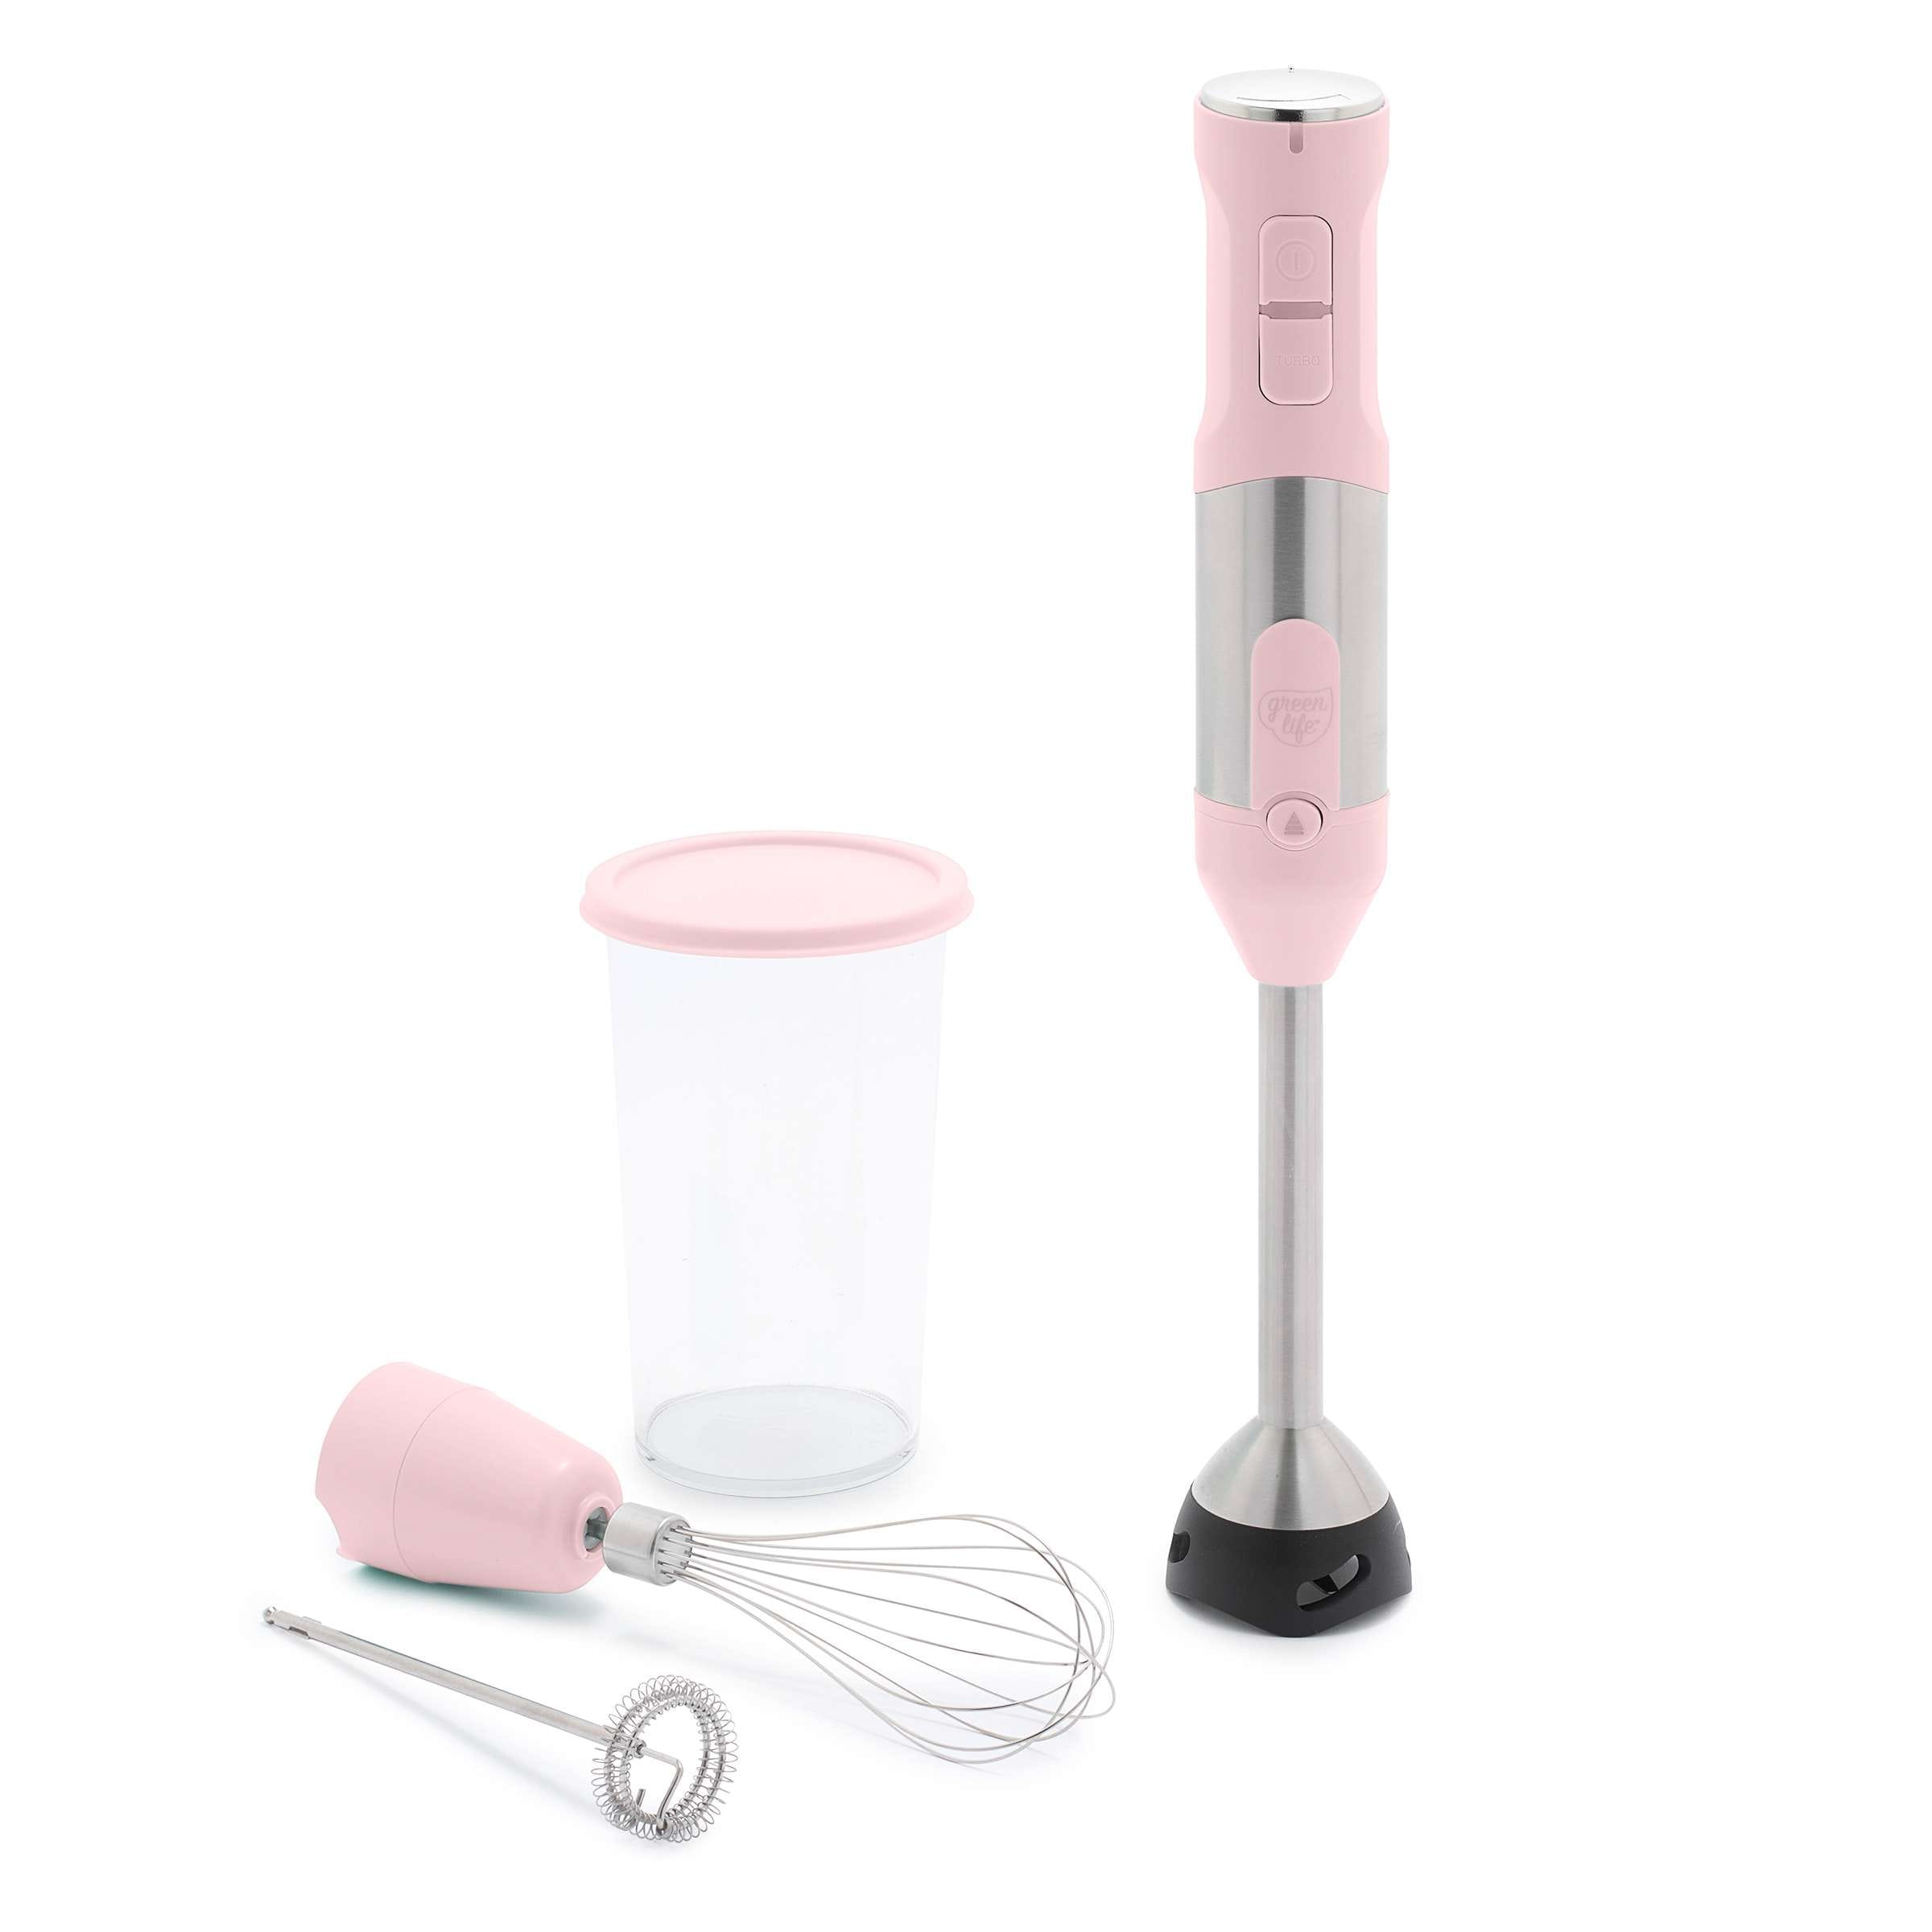 https://ak1.ostkcdn.com/images/products/is/images/direct/cdab5e343d54171eca2e662dada0c88c8ba43d52/GreenLife-Variable-Speed-Hand-Blender.jpg